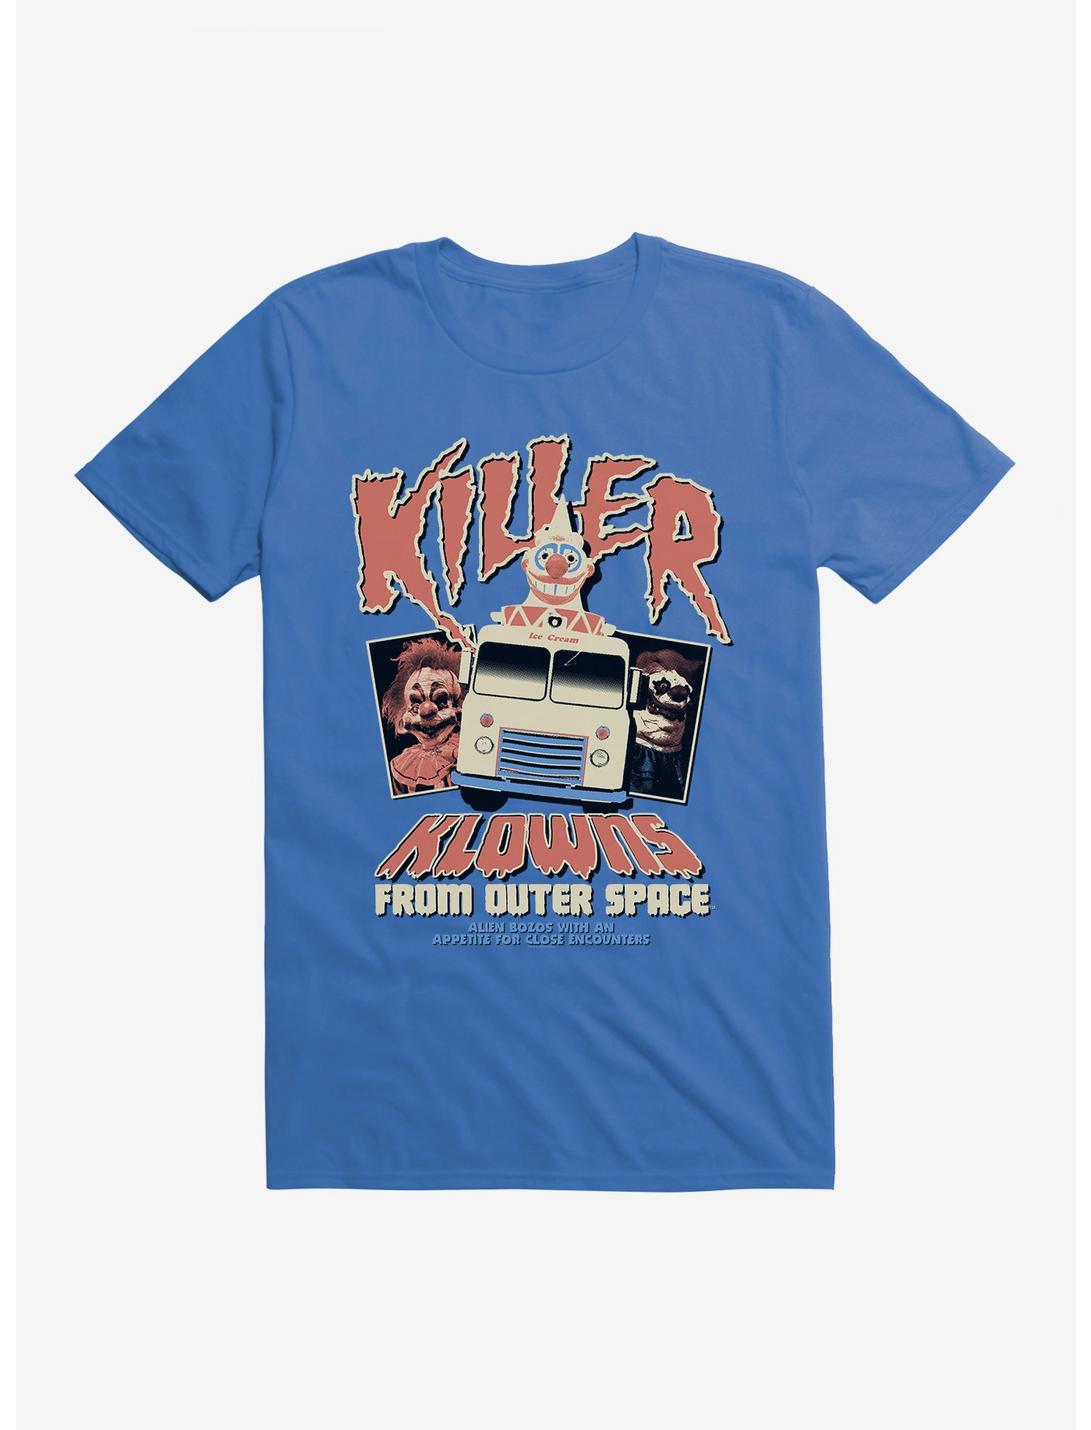 Killer Klowns From Outer Space Vintage Movie Poster T-Shirt, , hi-res